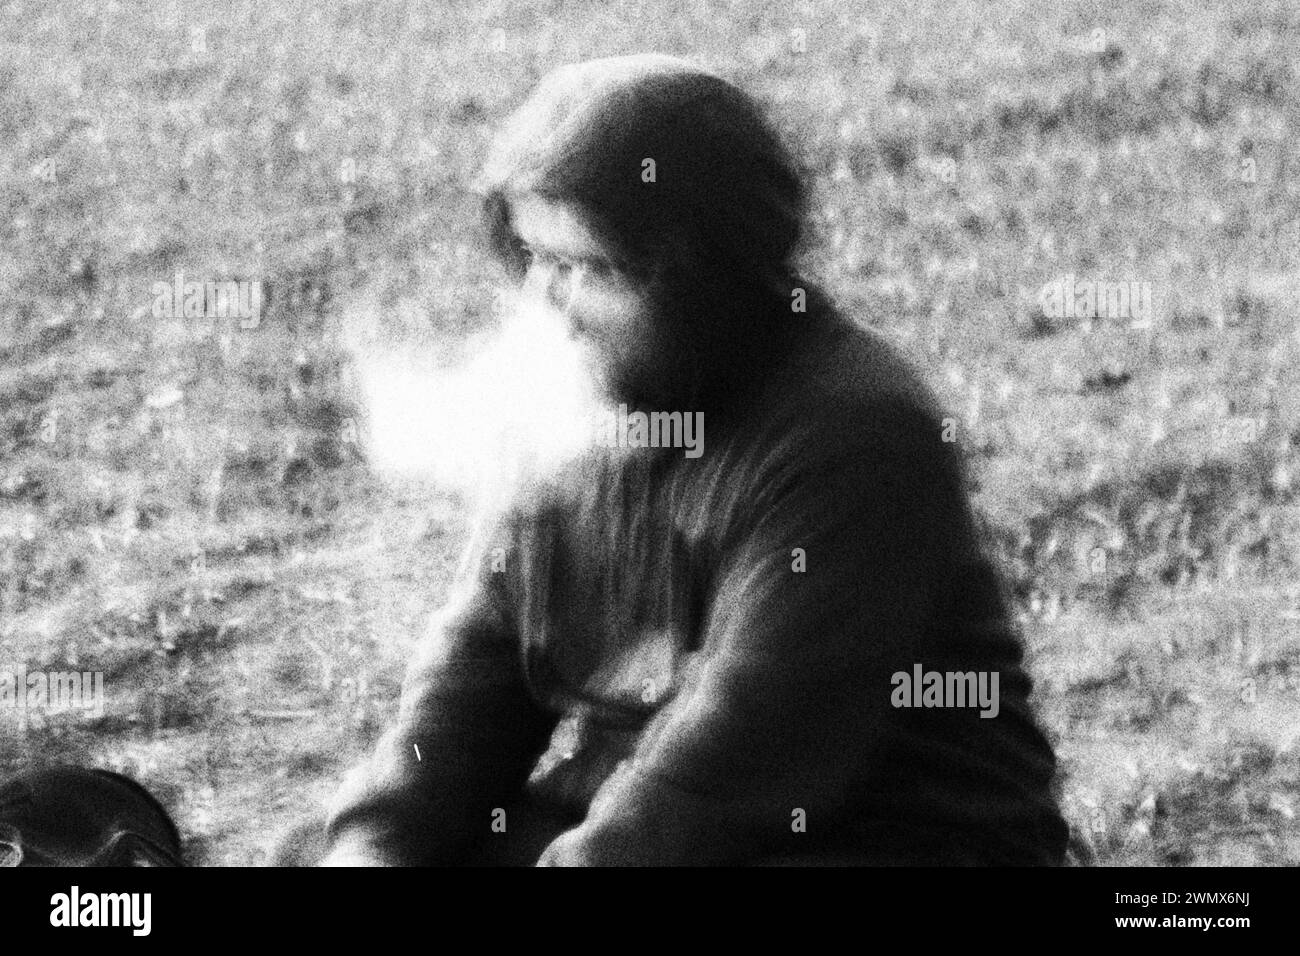 In a scene shrouded in mystery, a person wearing a hoodie emerges from behind a dense cloud of smoke, captured in striking black and white with a nois Stock Photo